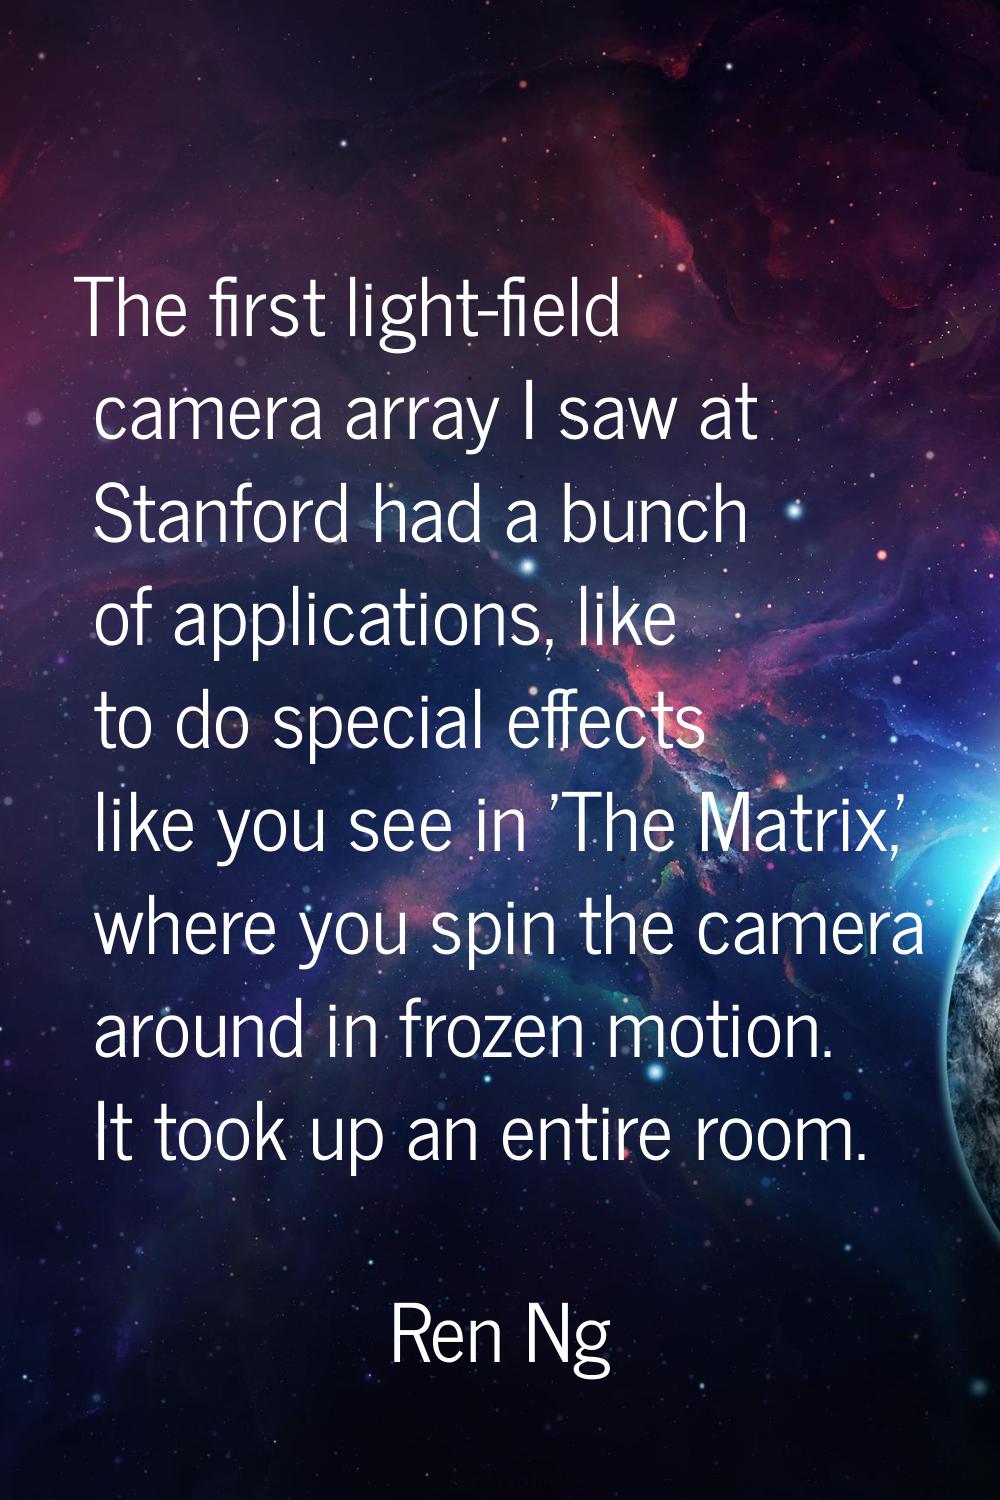 The first light-field camera array I saw at Stanford had a bunch of applications, like to do specia